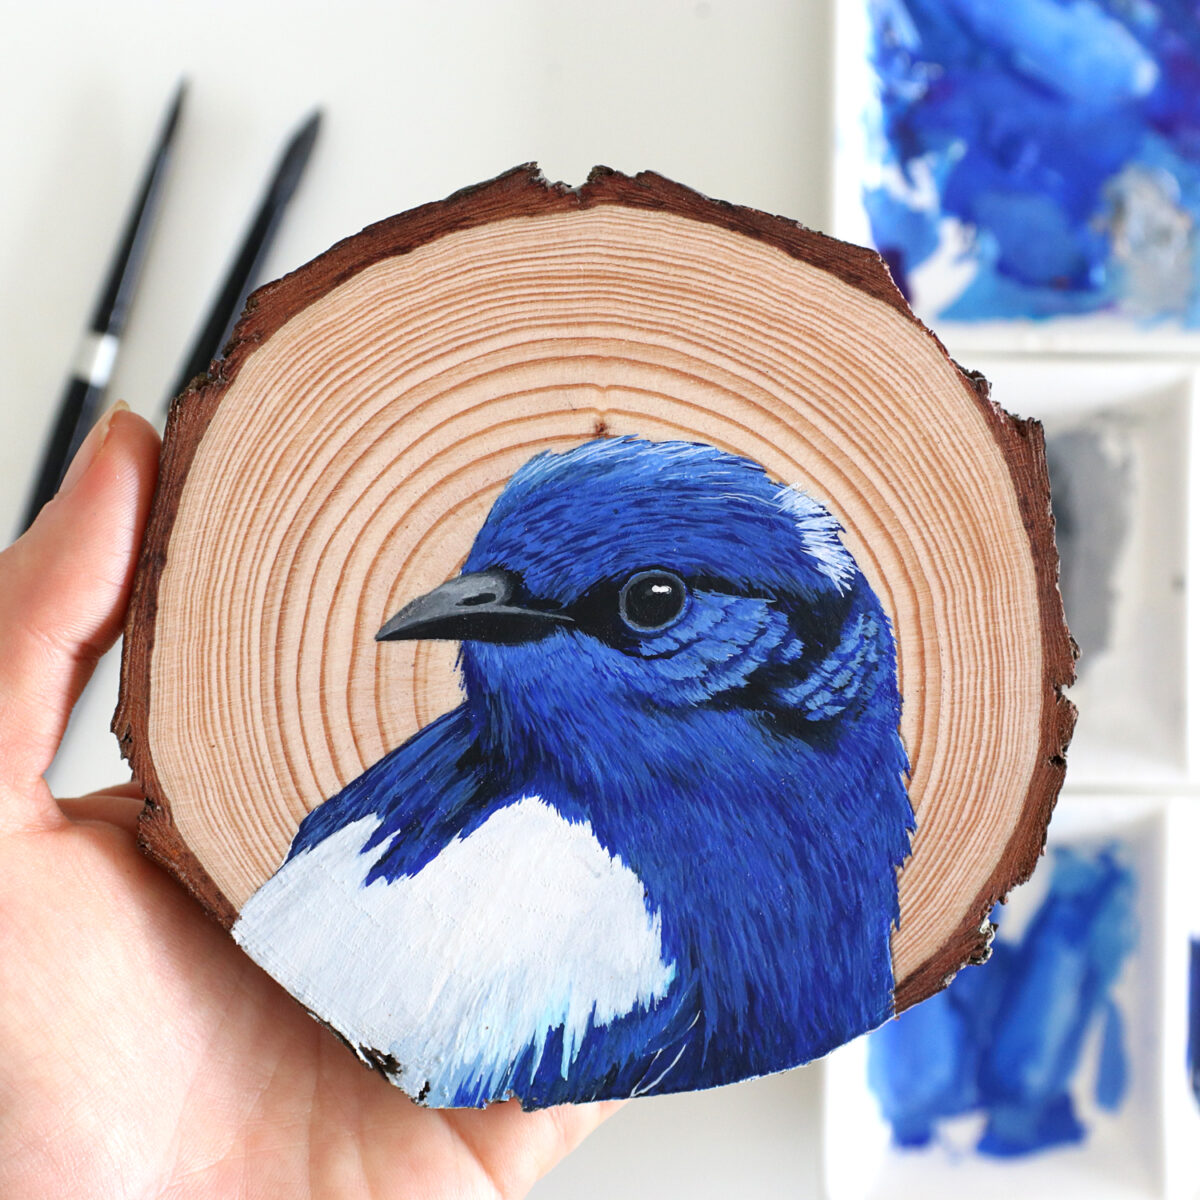 100 Days Of Birds A Marvelous Series Of Gouache On Wood Paintings By Deanna Maree (9)